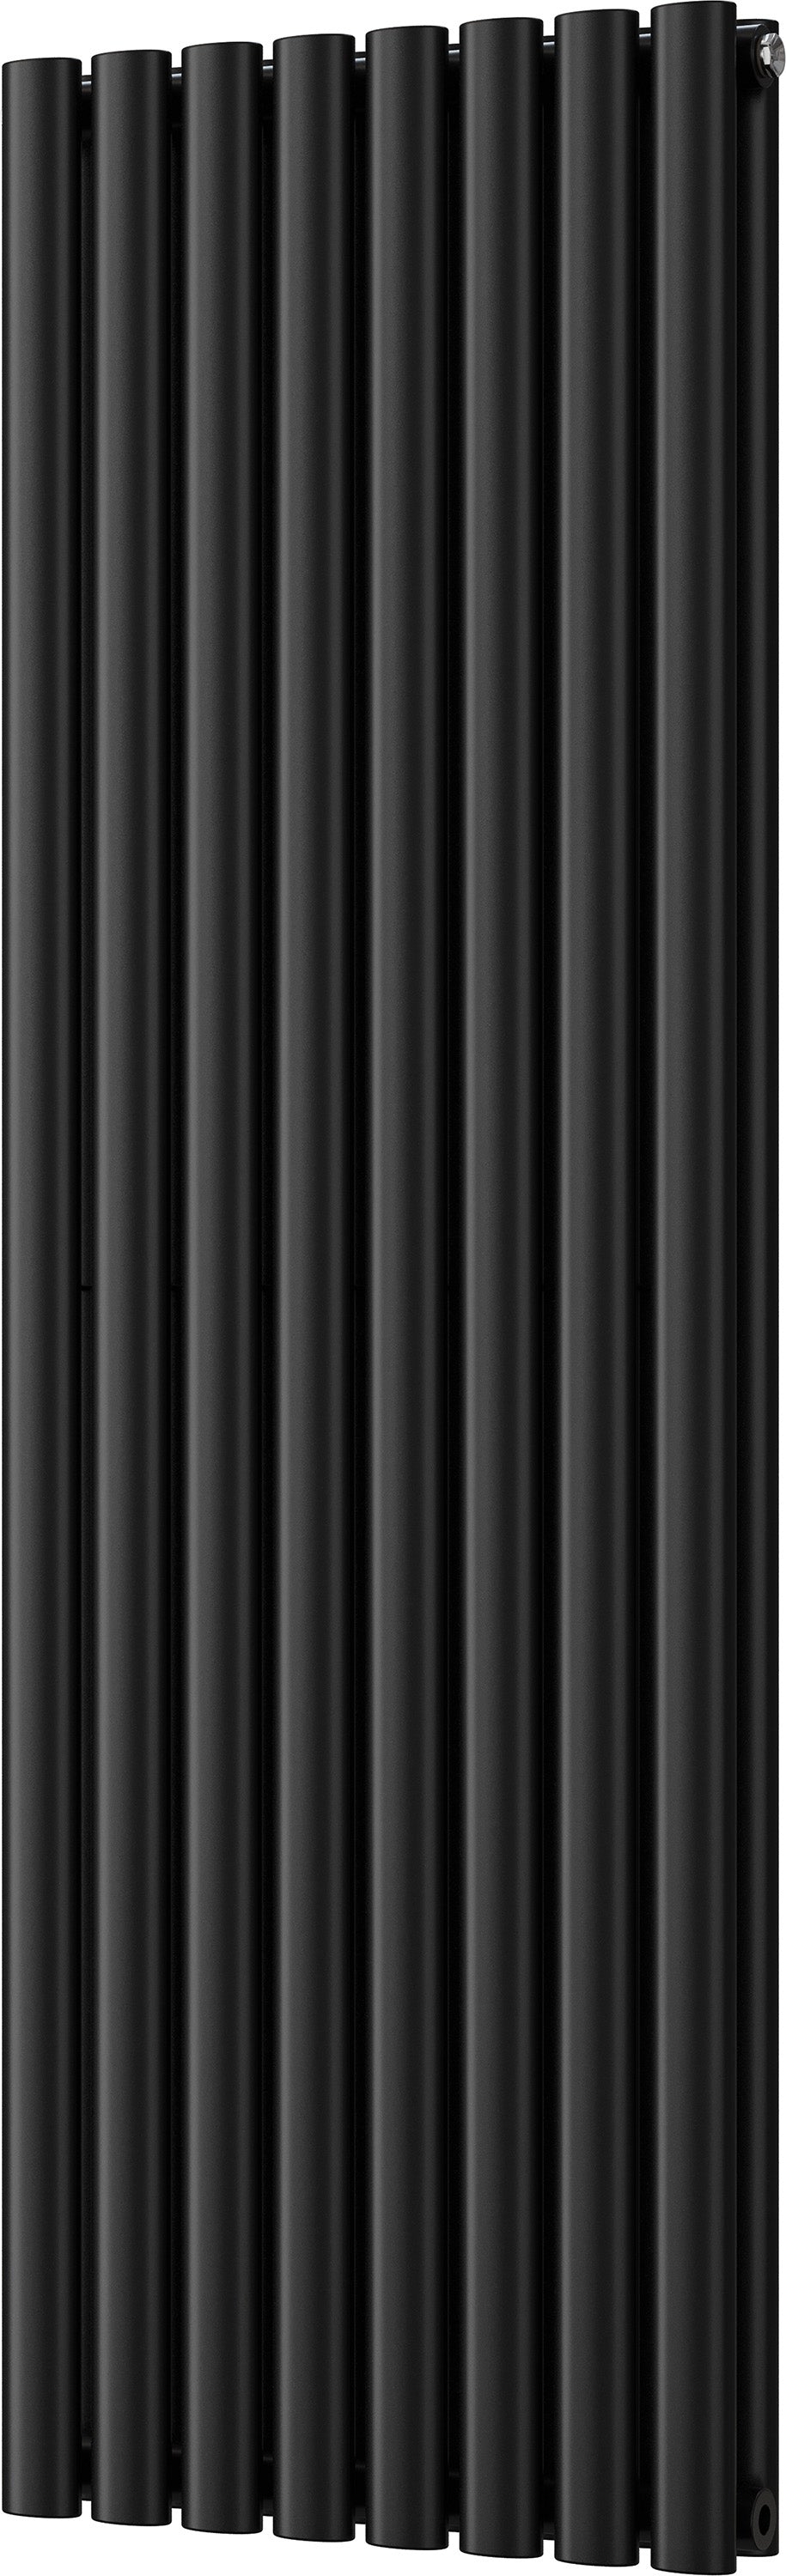 Omeara - Black Vertical Radiator H1400mm x W464mm Double Panel